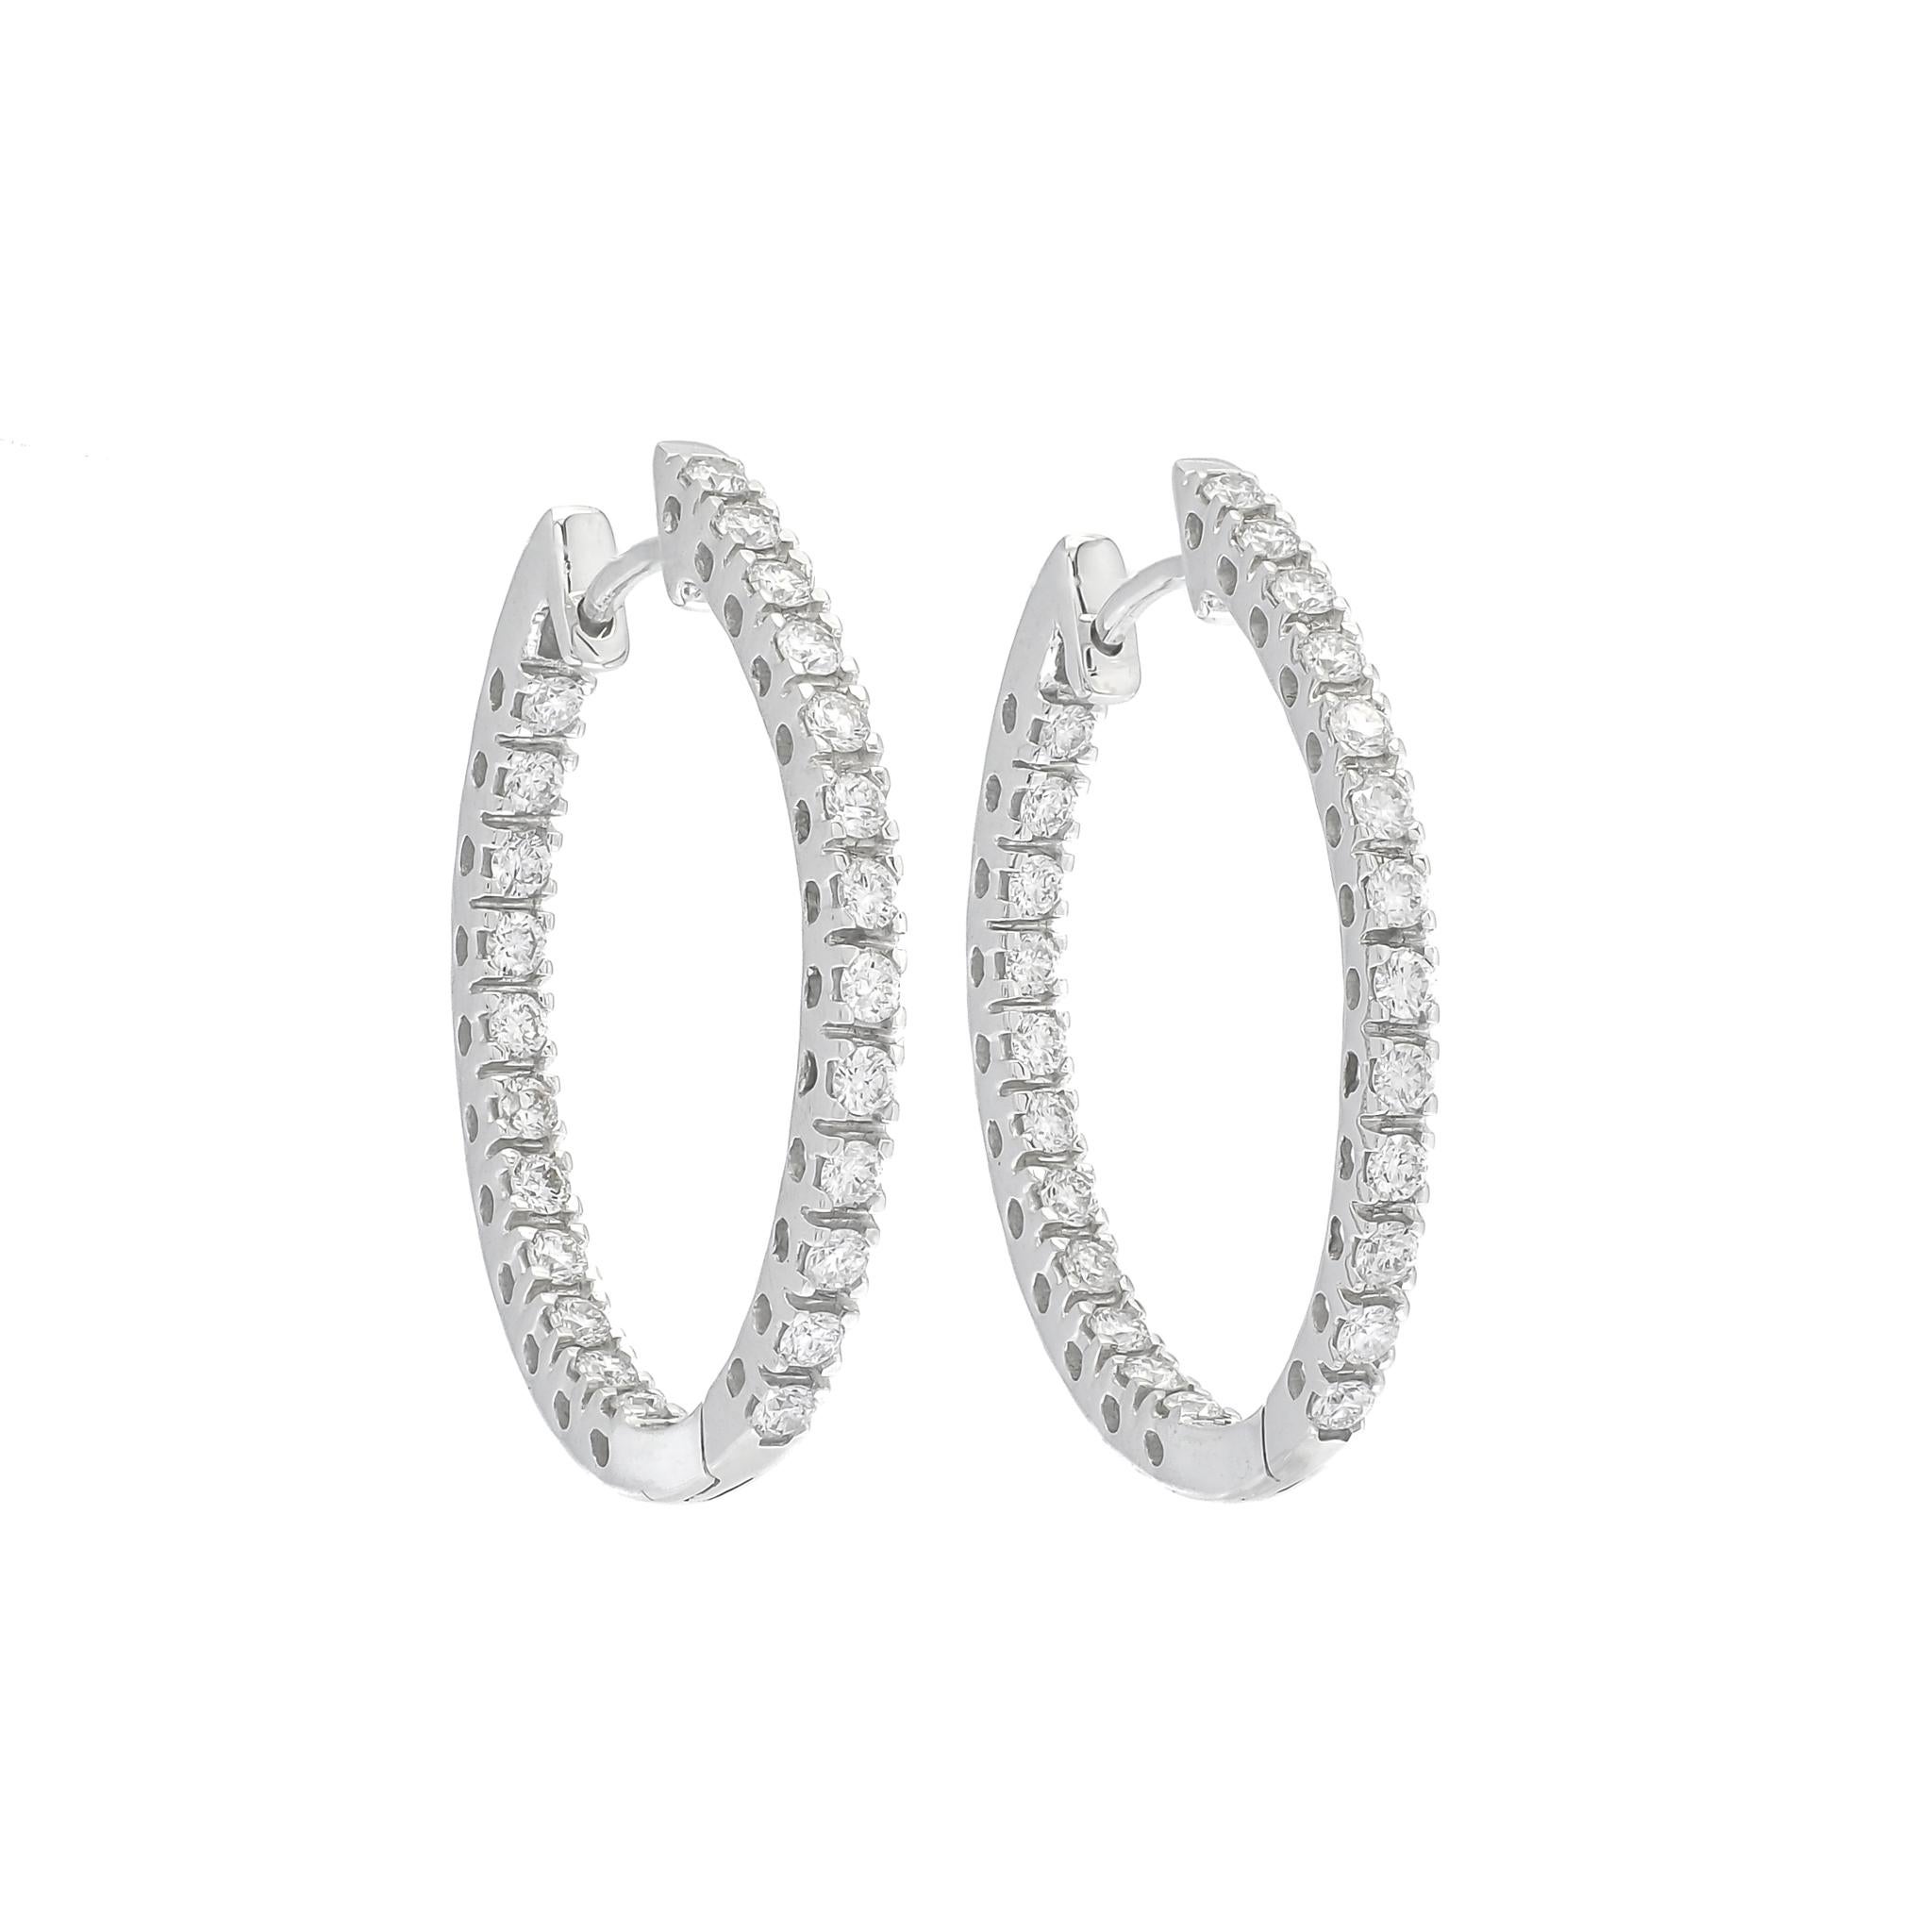 Brilliant Cut Natural Diamond 1.02 CT 18Karat White Gold Inside Out Brilliant Hoop Earrings For Sale